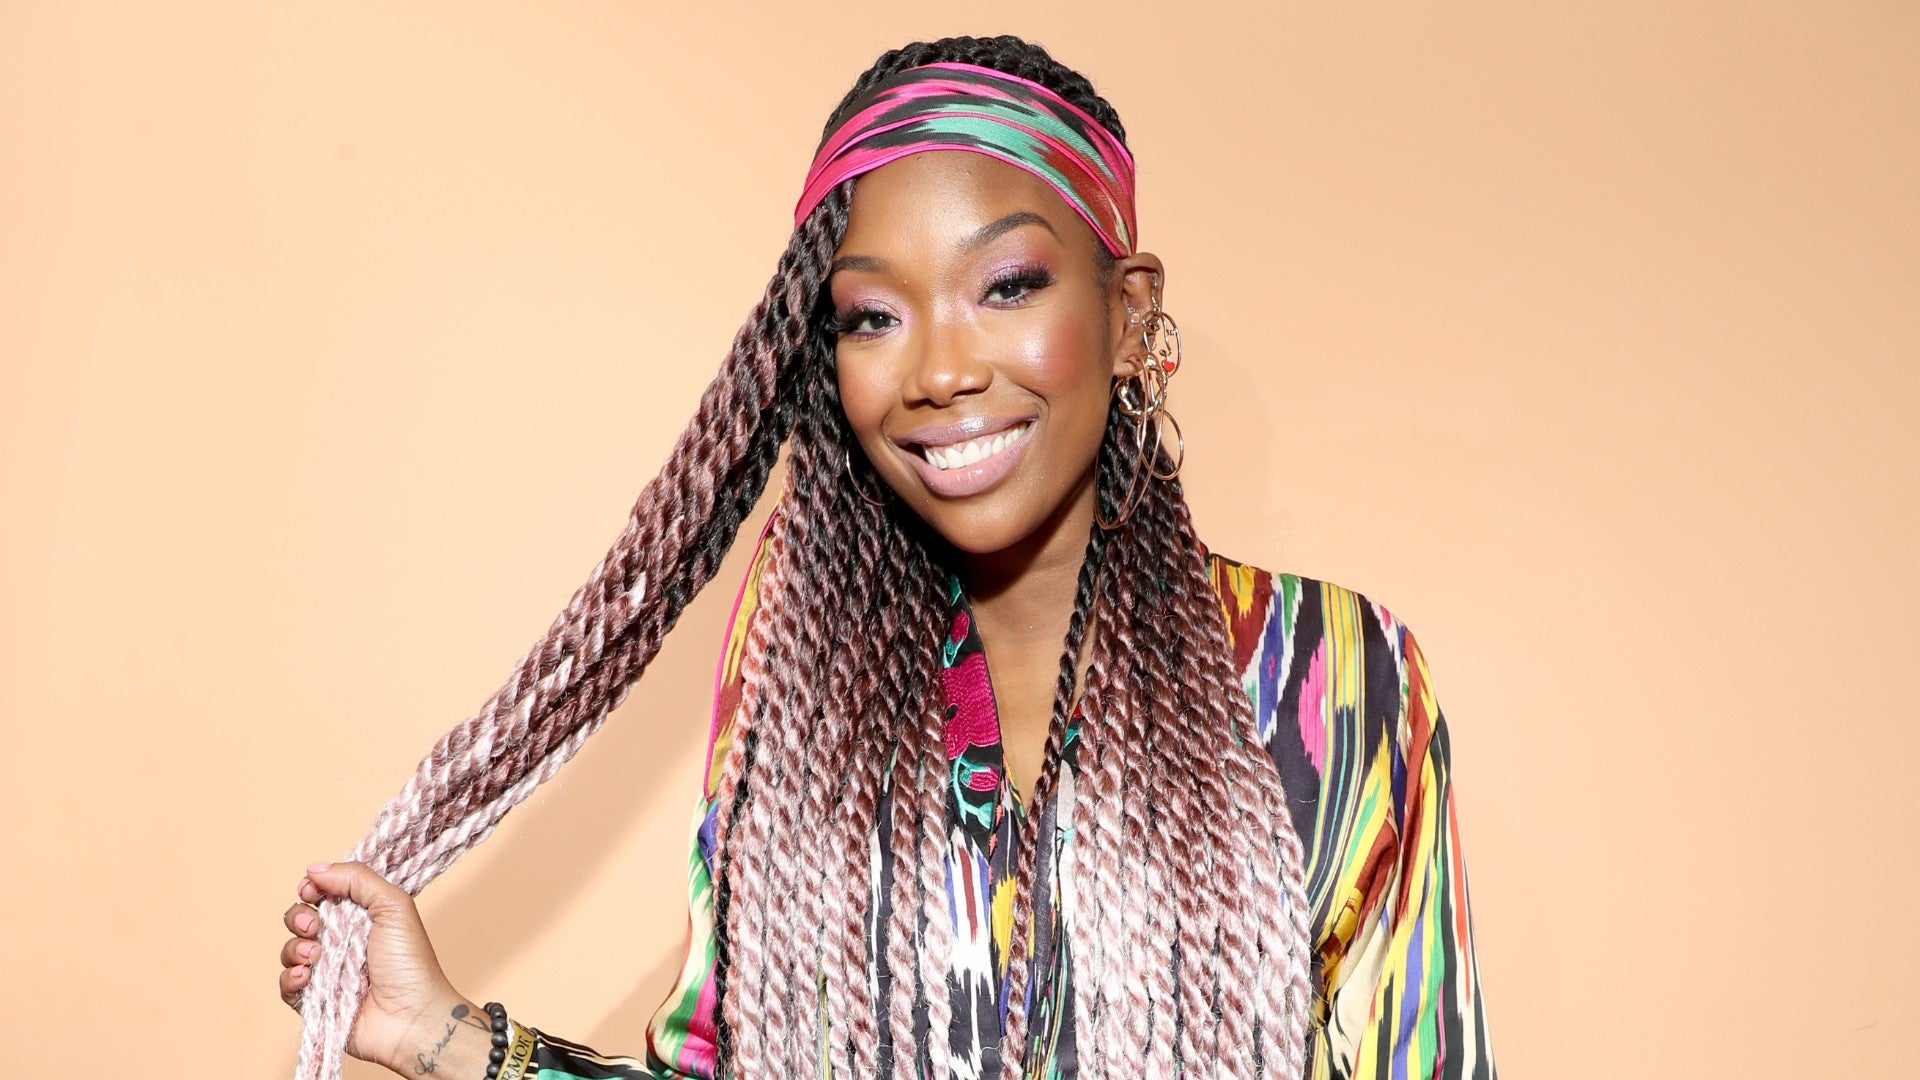 Celebrity Hairstylist Chuck Amos Sets The Record Straight About Brandy's Braids